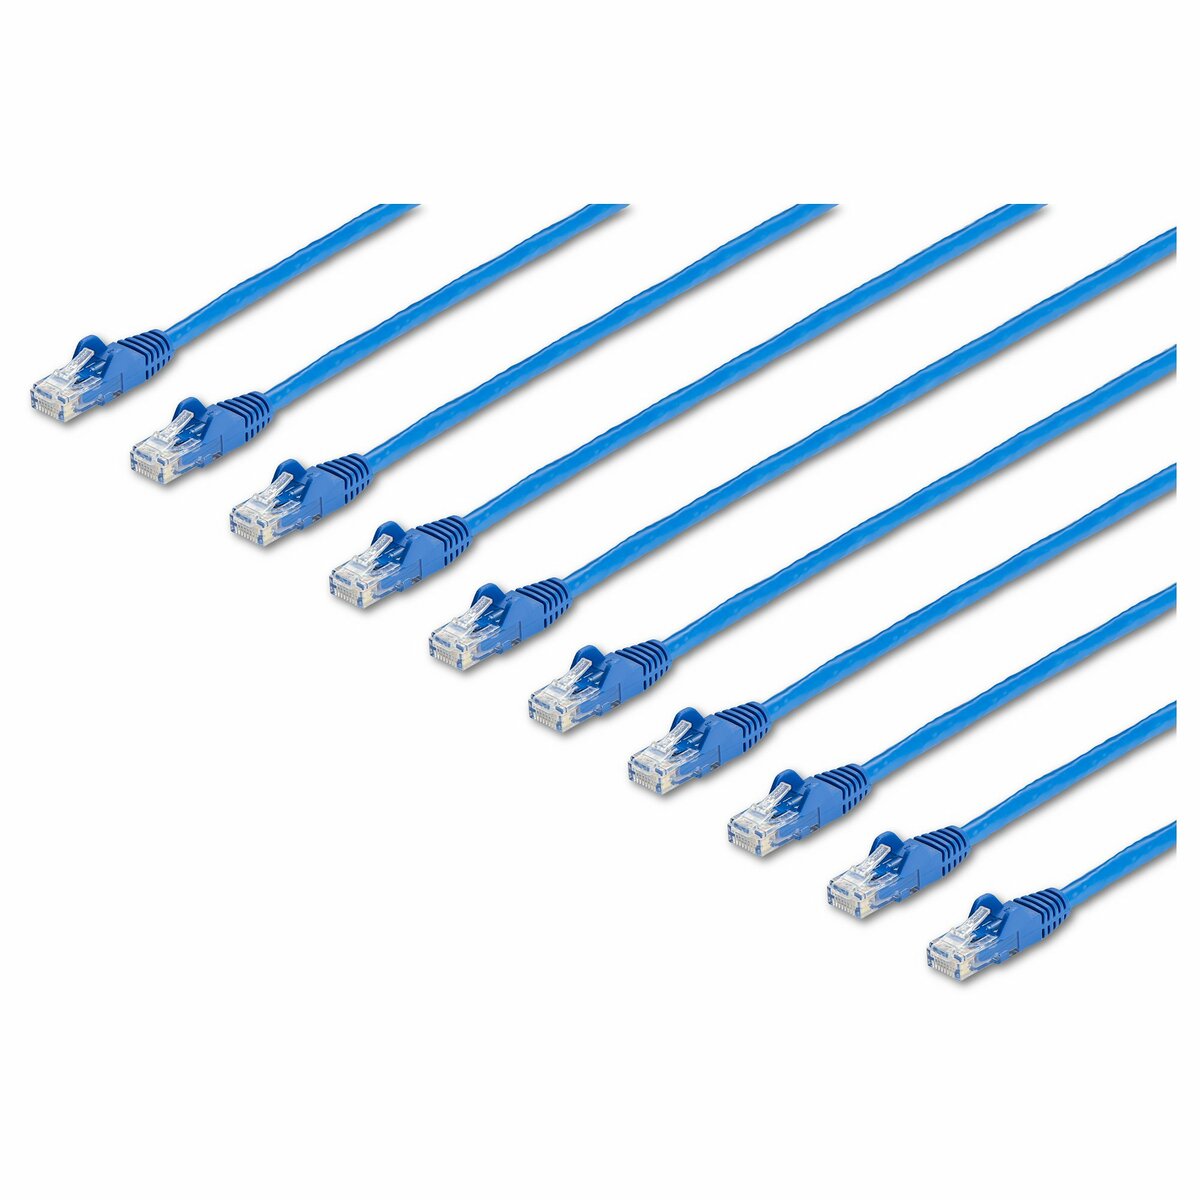 Shop  StarTech.com CAT6 Ethernet cable multipack meets all ANSI/TIA-568-D Category  6 patch cable specifications - This Blue Ethernet cable 10 pack is ETL  Verified to ensure an elevated level of quality